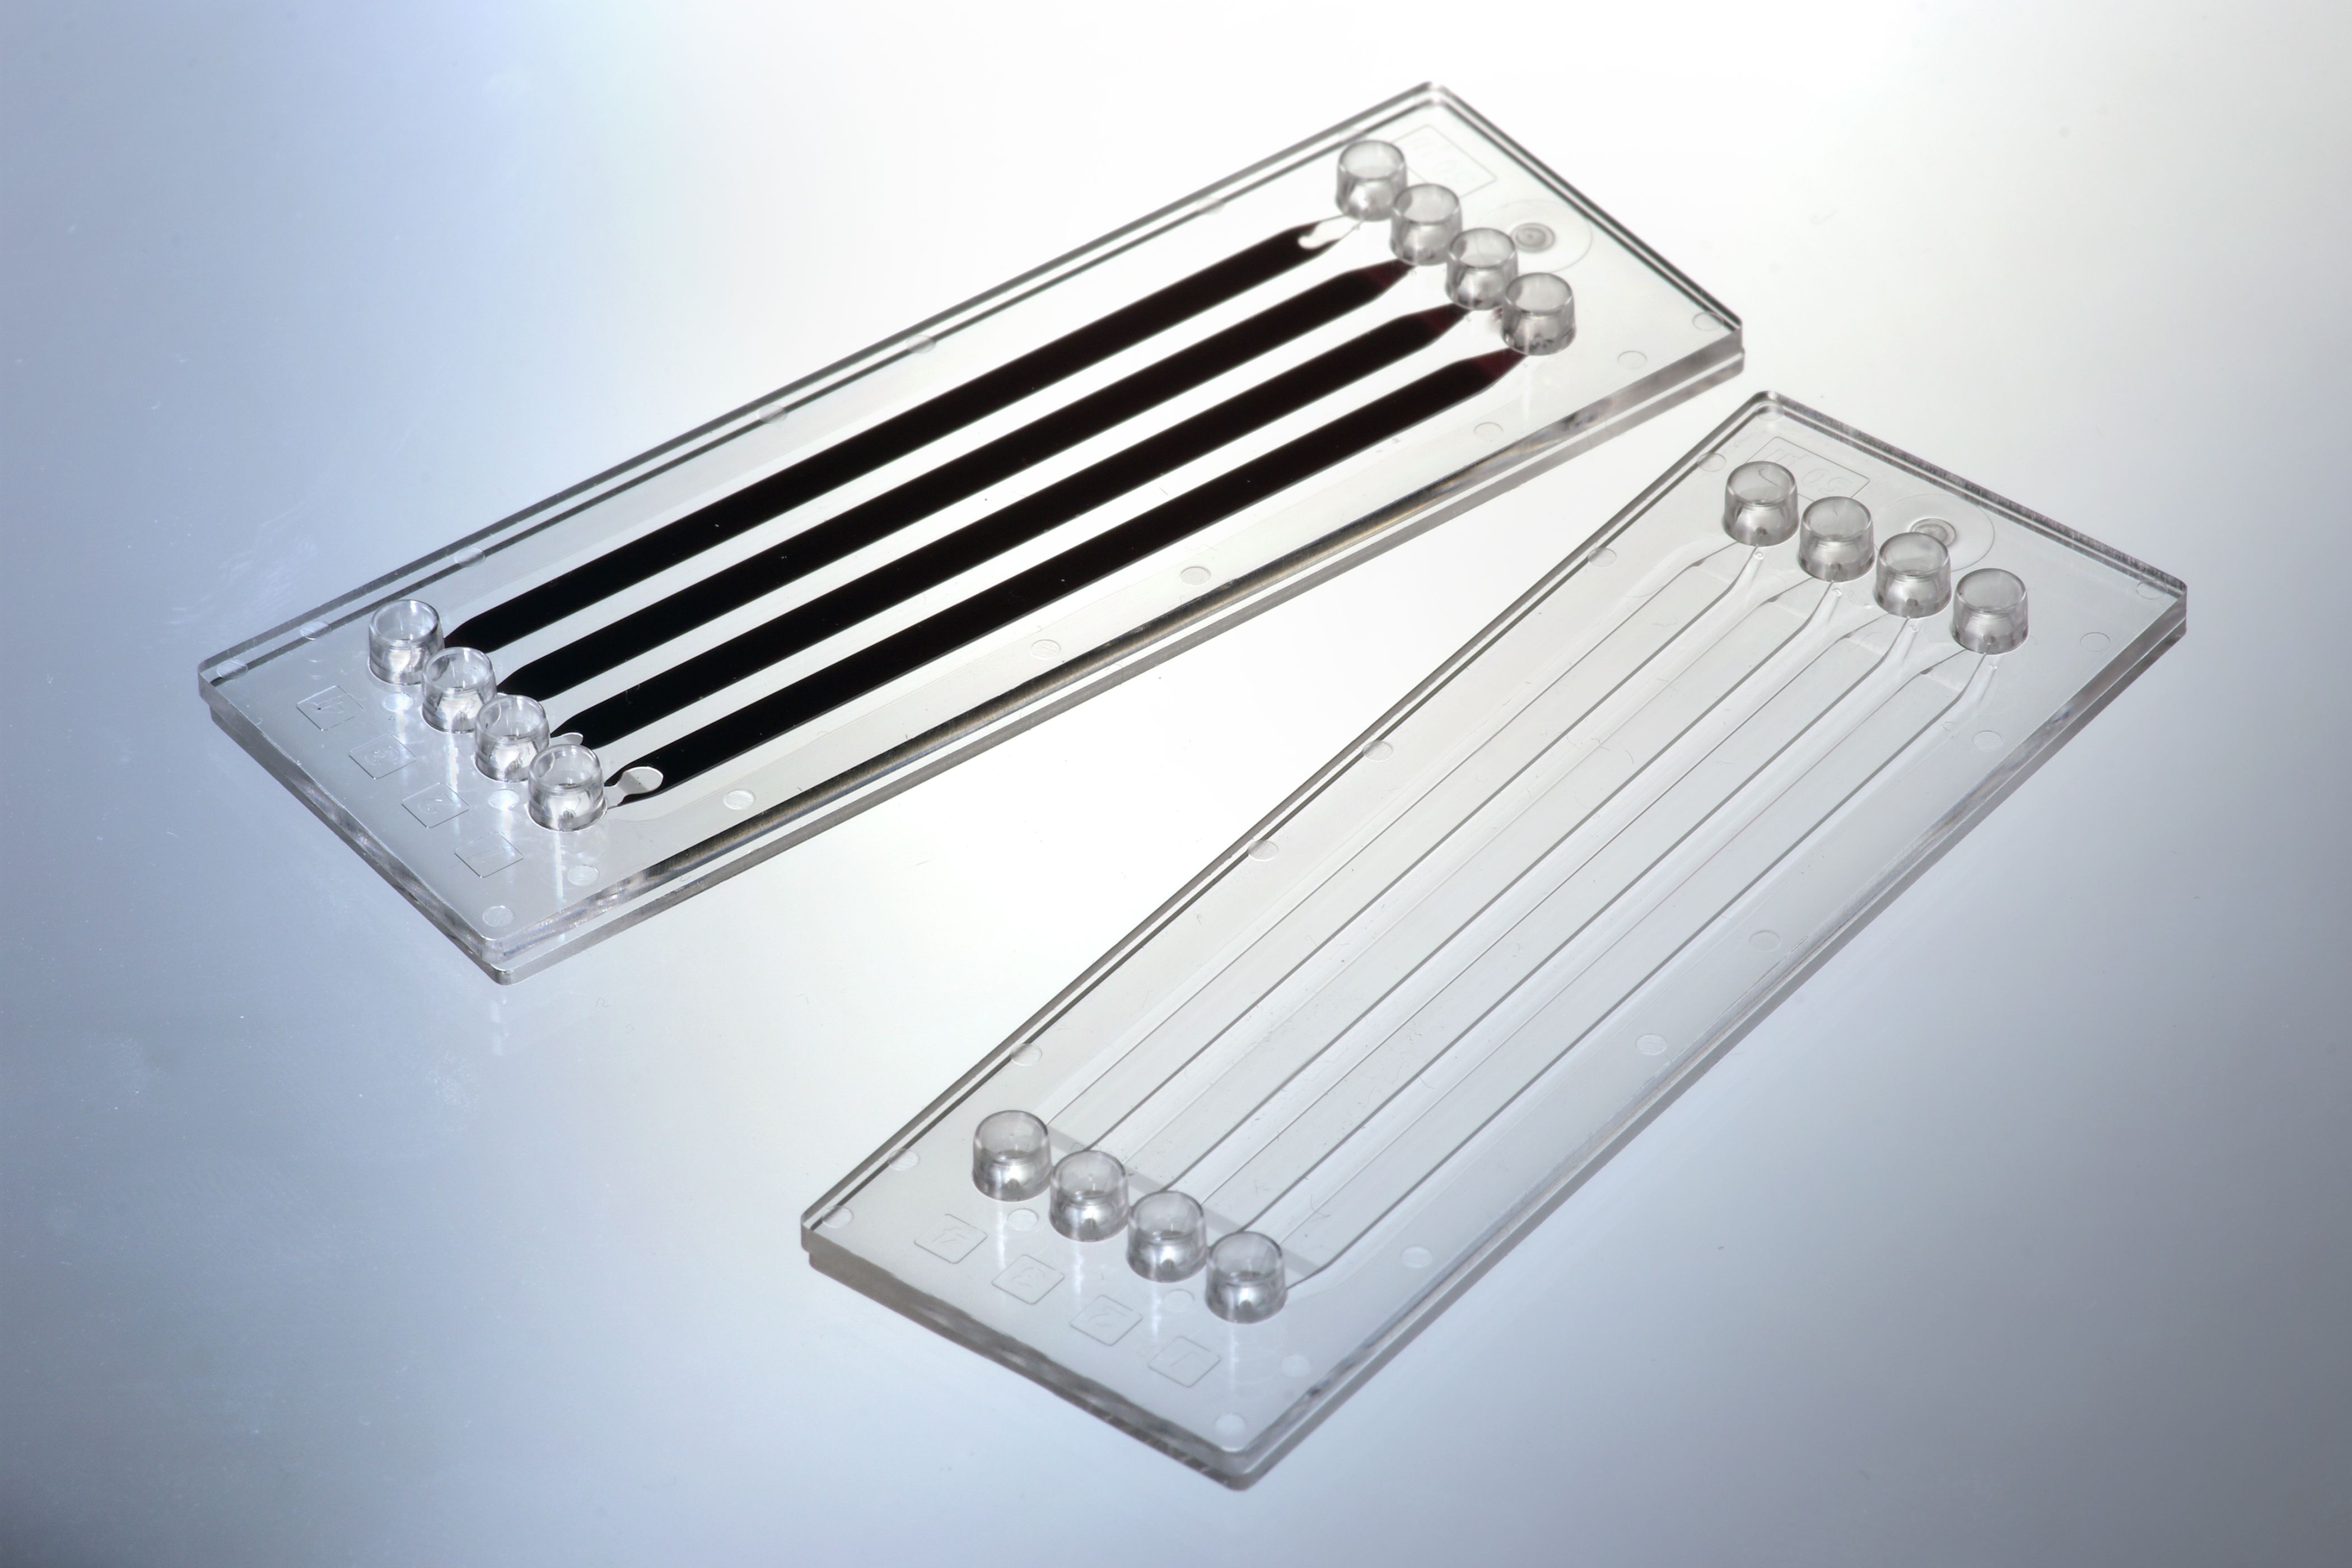 With the developed joining process, in which a thulium fiber laser is used, high-precision welding of microfluidic components can be achieved.